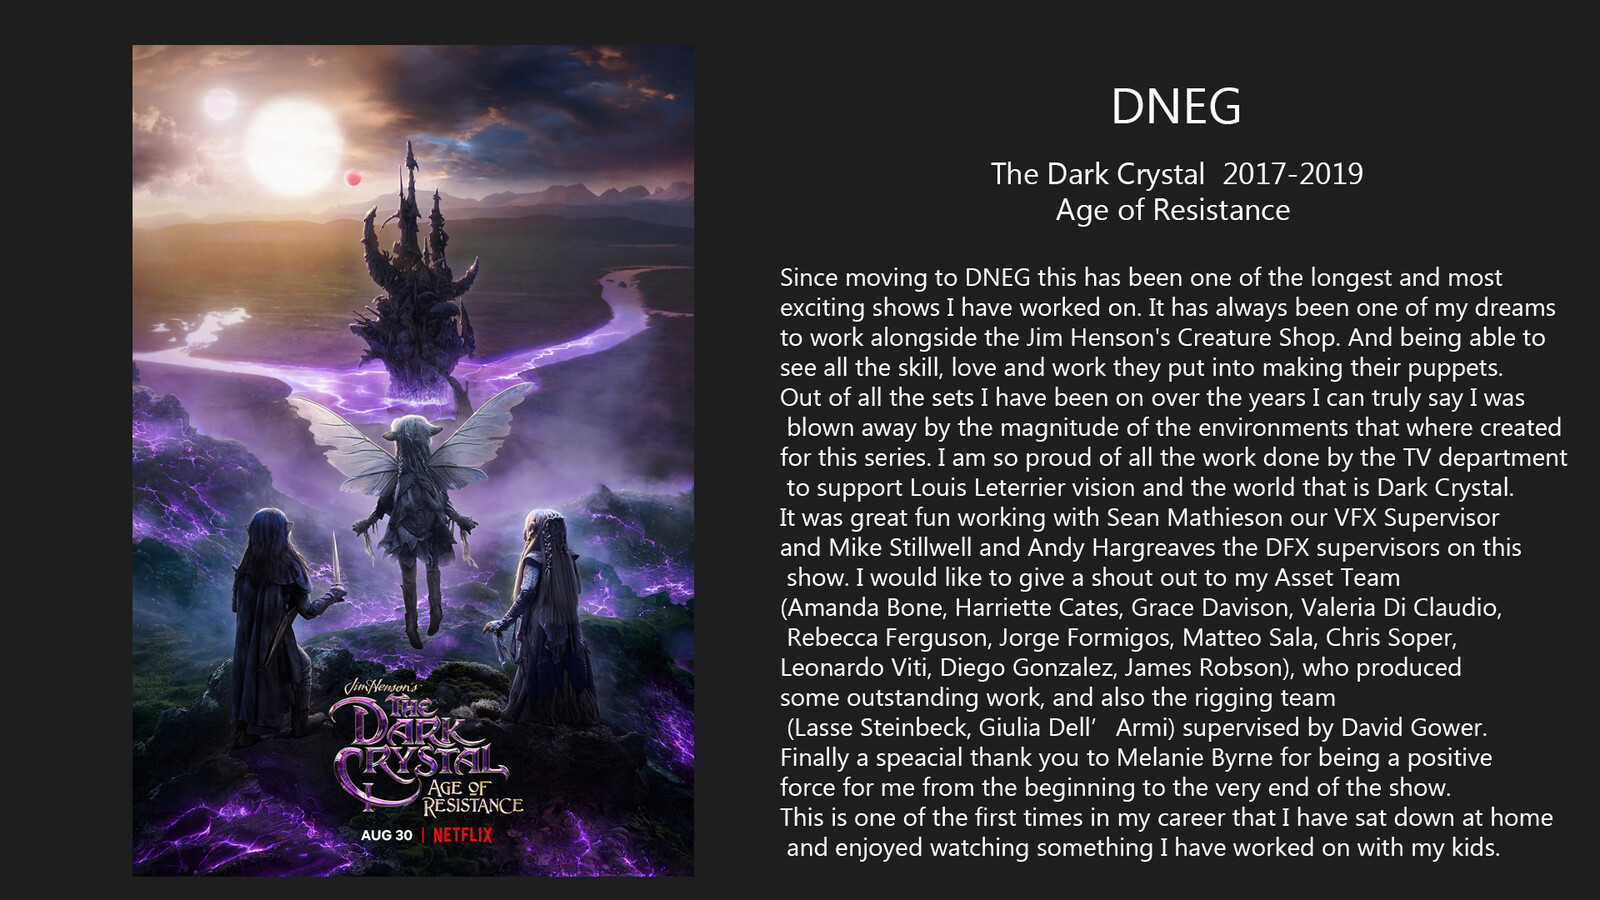 The Dark Crystal age of resistance